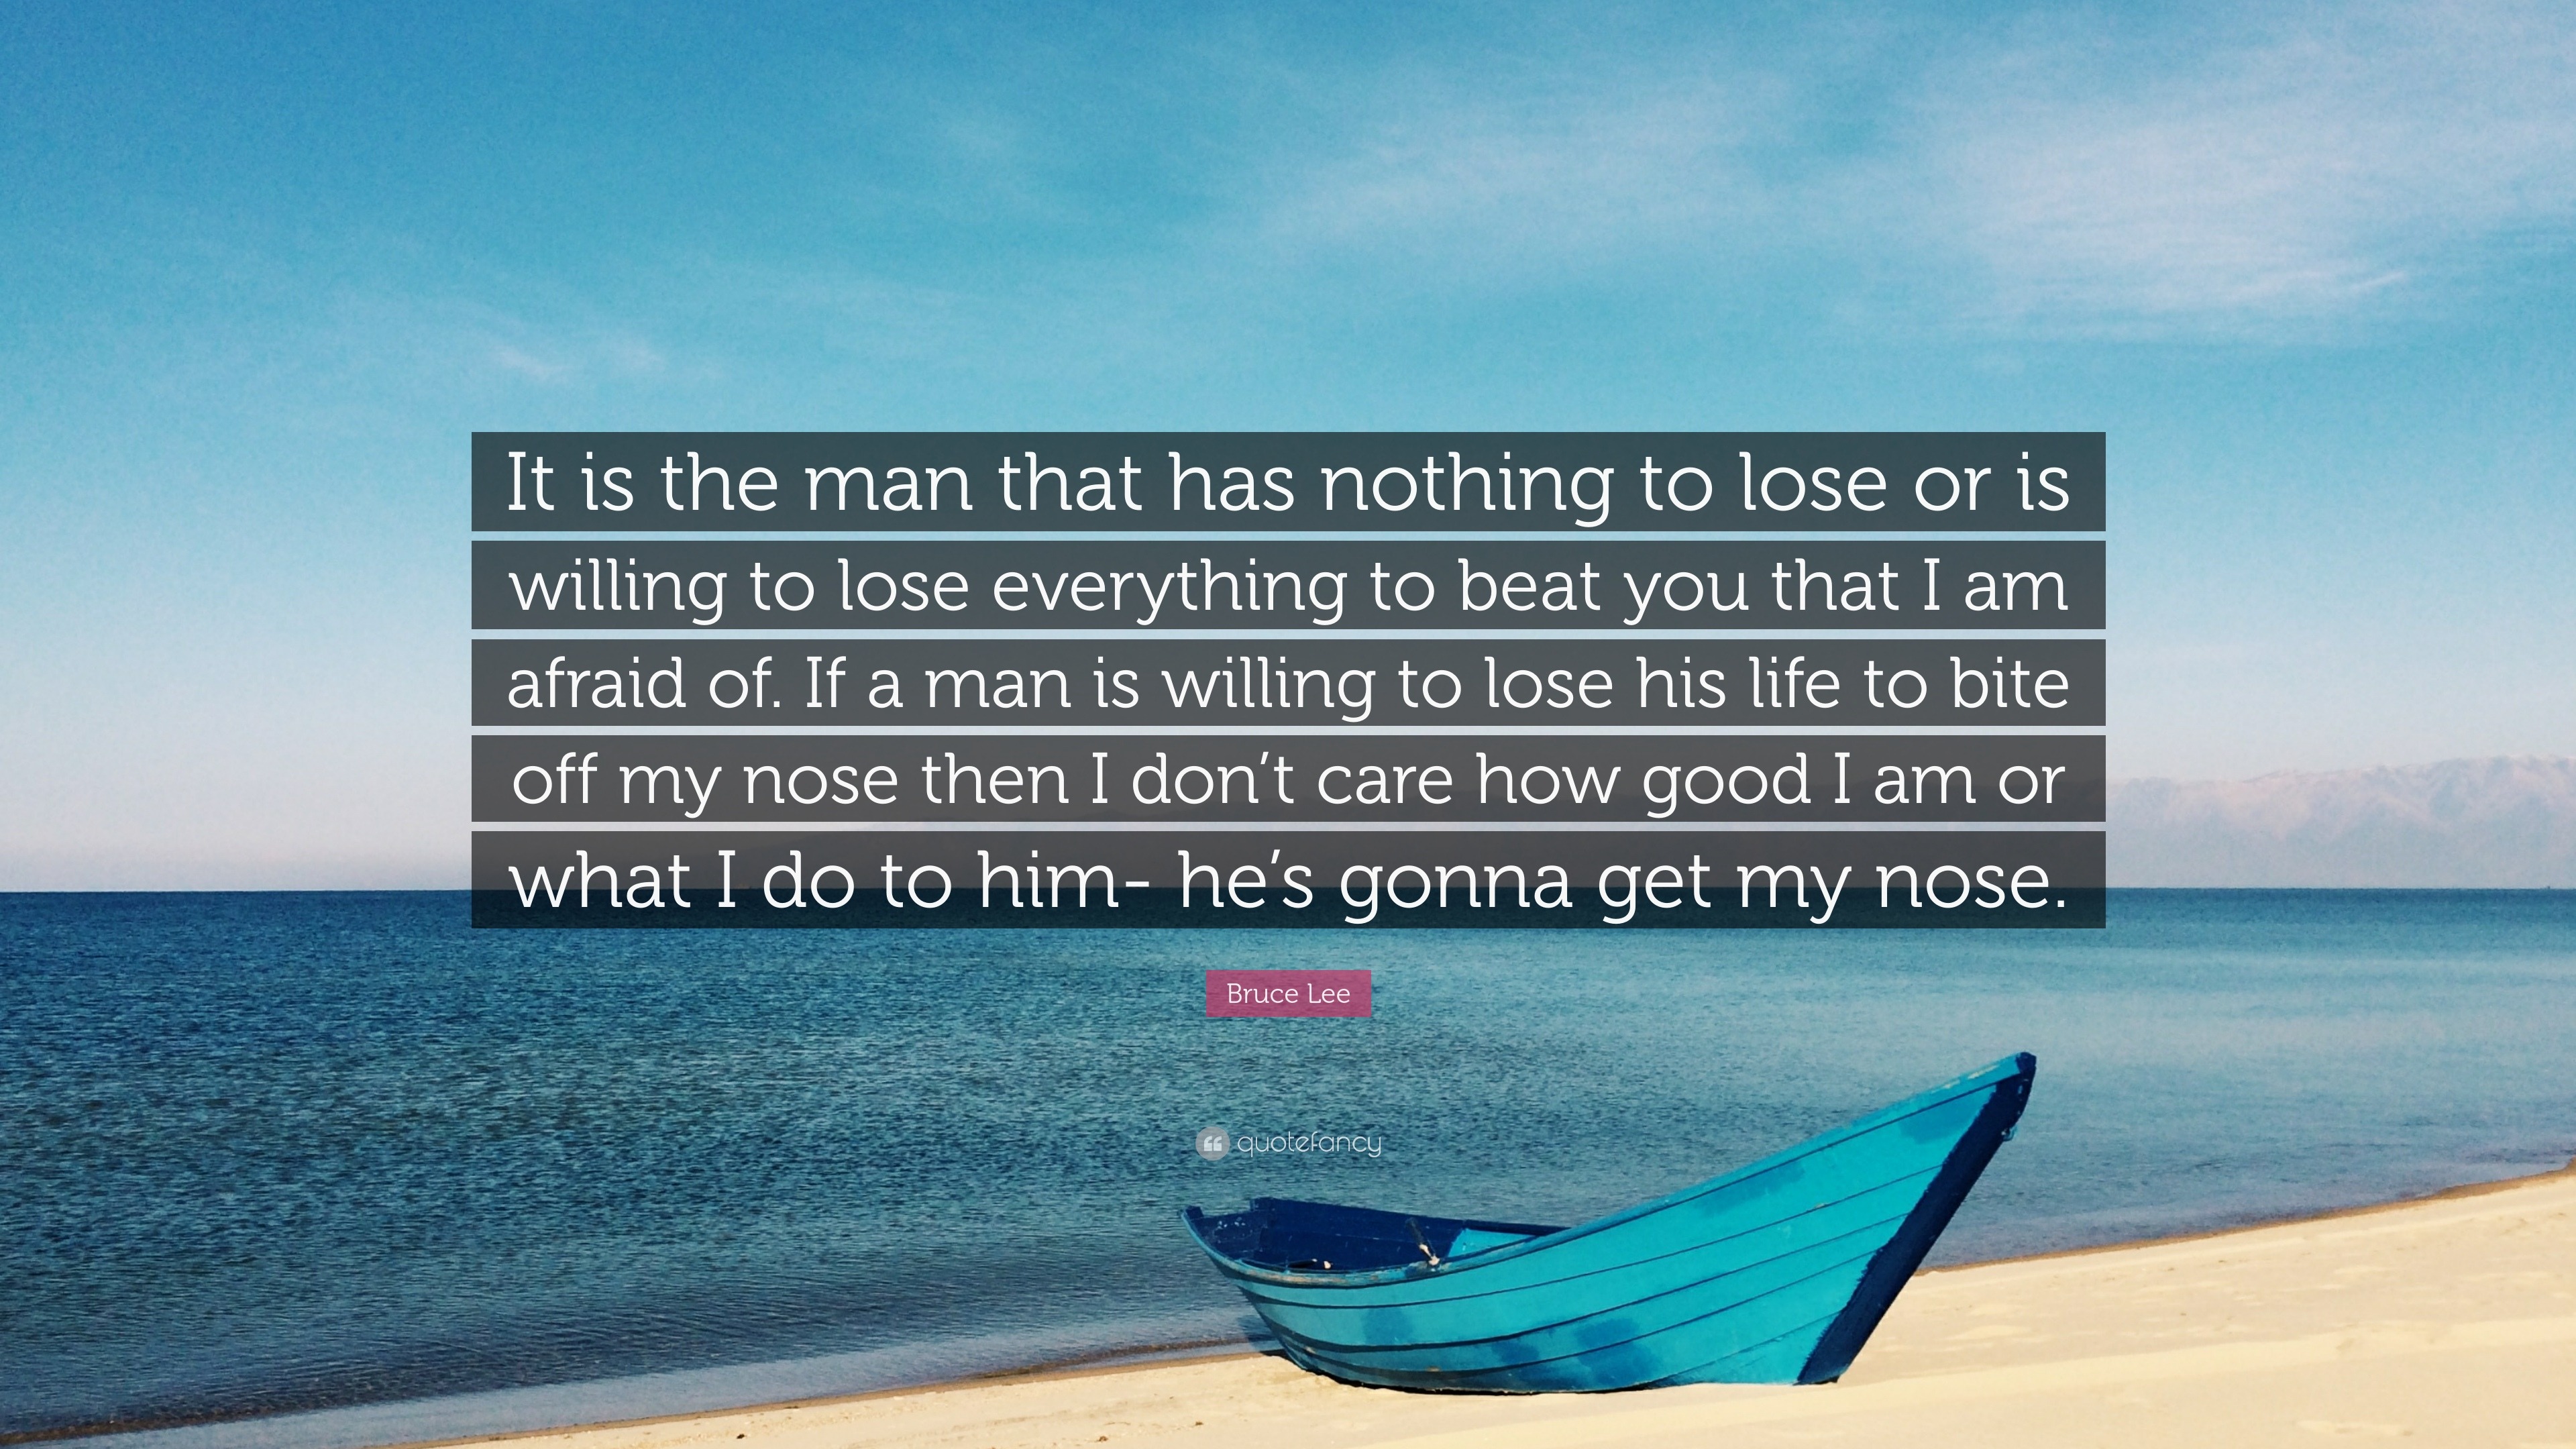 Bruce Lee Quote: “It is the man that has nothing to lose or is willing ...